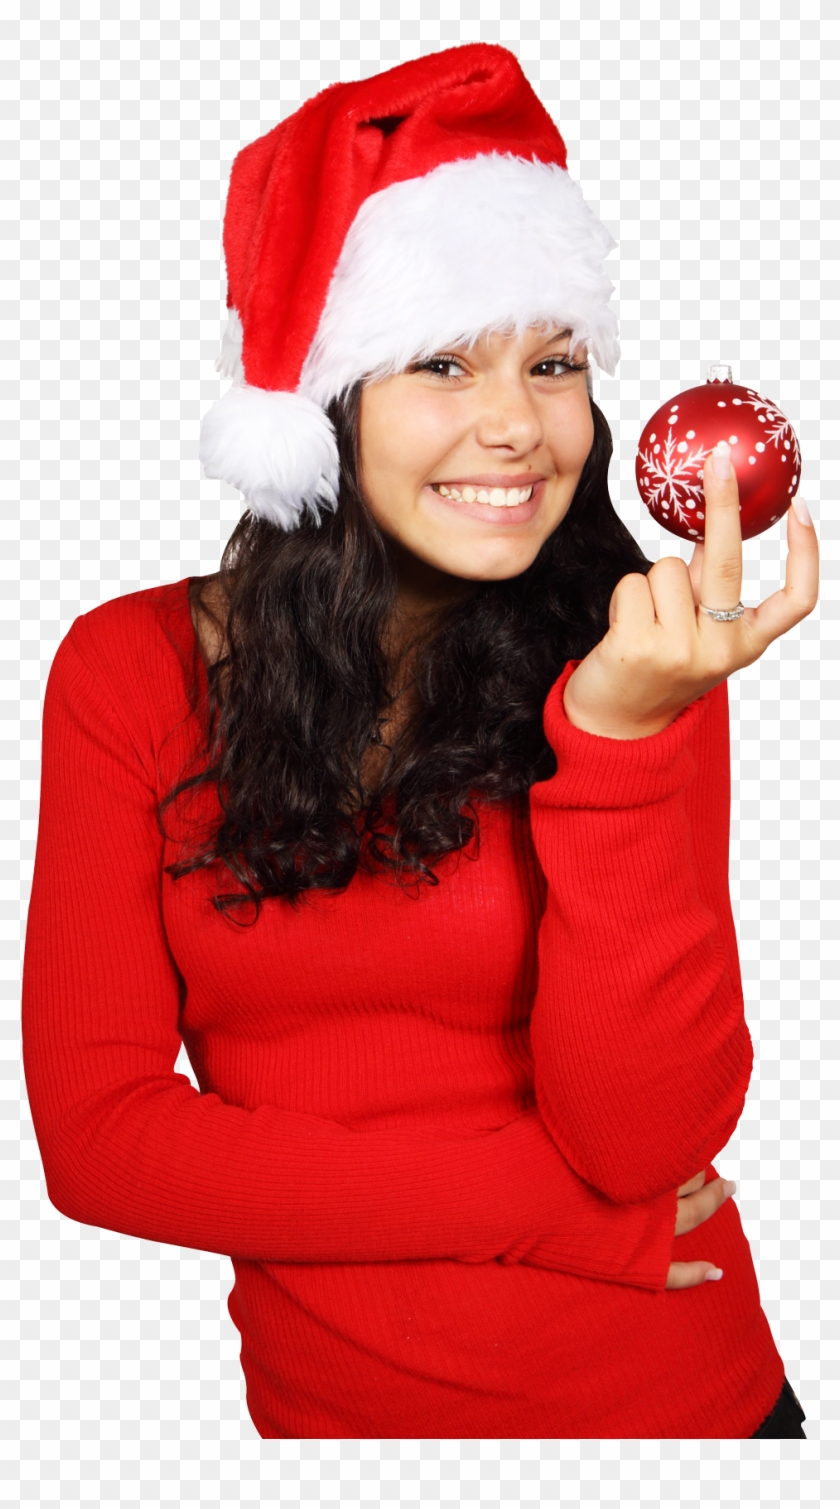 Lady Png Free Download - Christmas Girl Image Png #404053